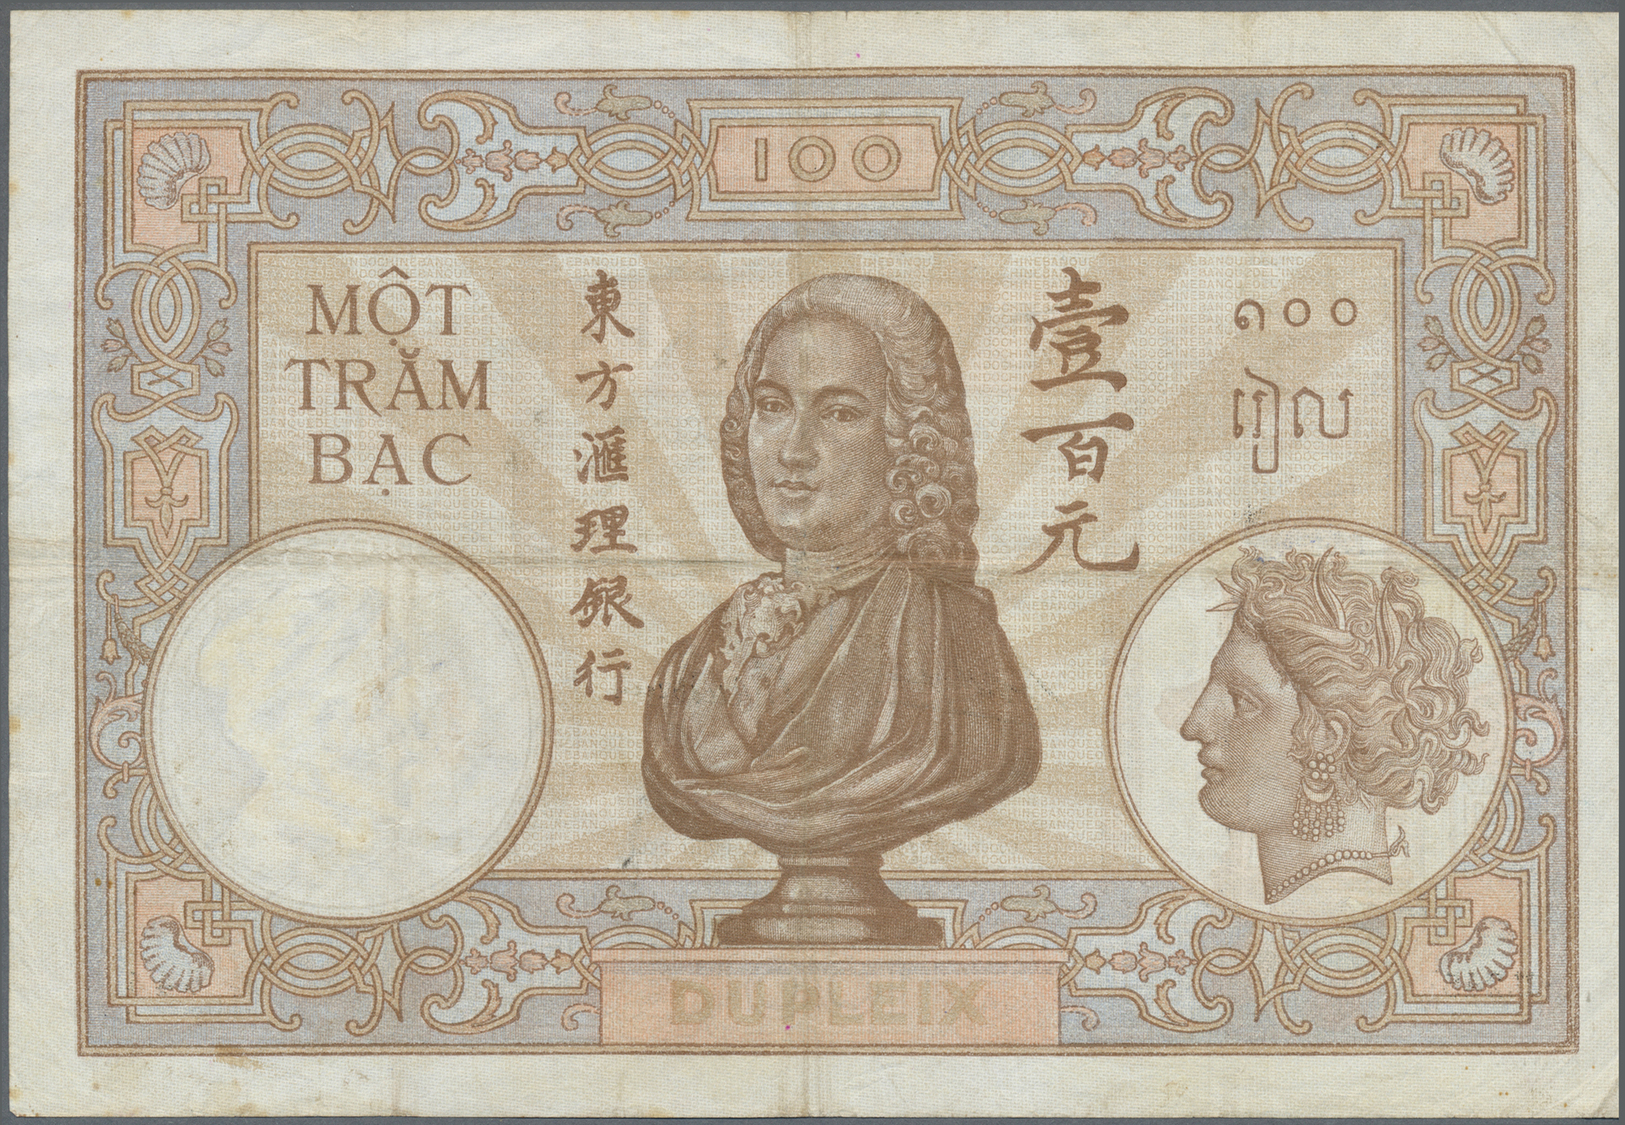 00846 French Indochina / Französisch Indochina: 100 Francs ND P. 51d In Used Condition With Folds And Light Stain In Pap - Indochina